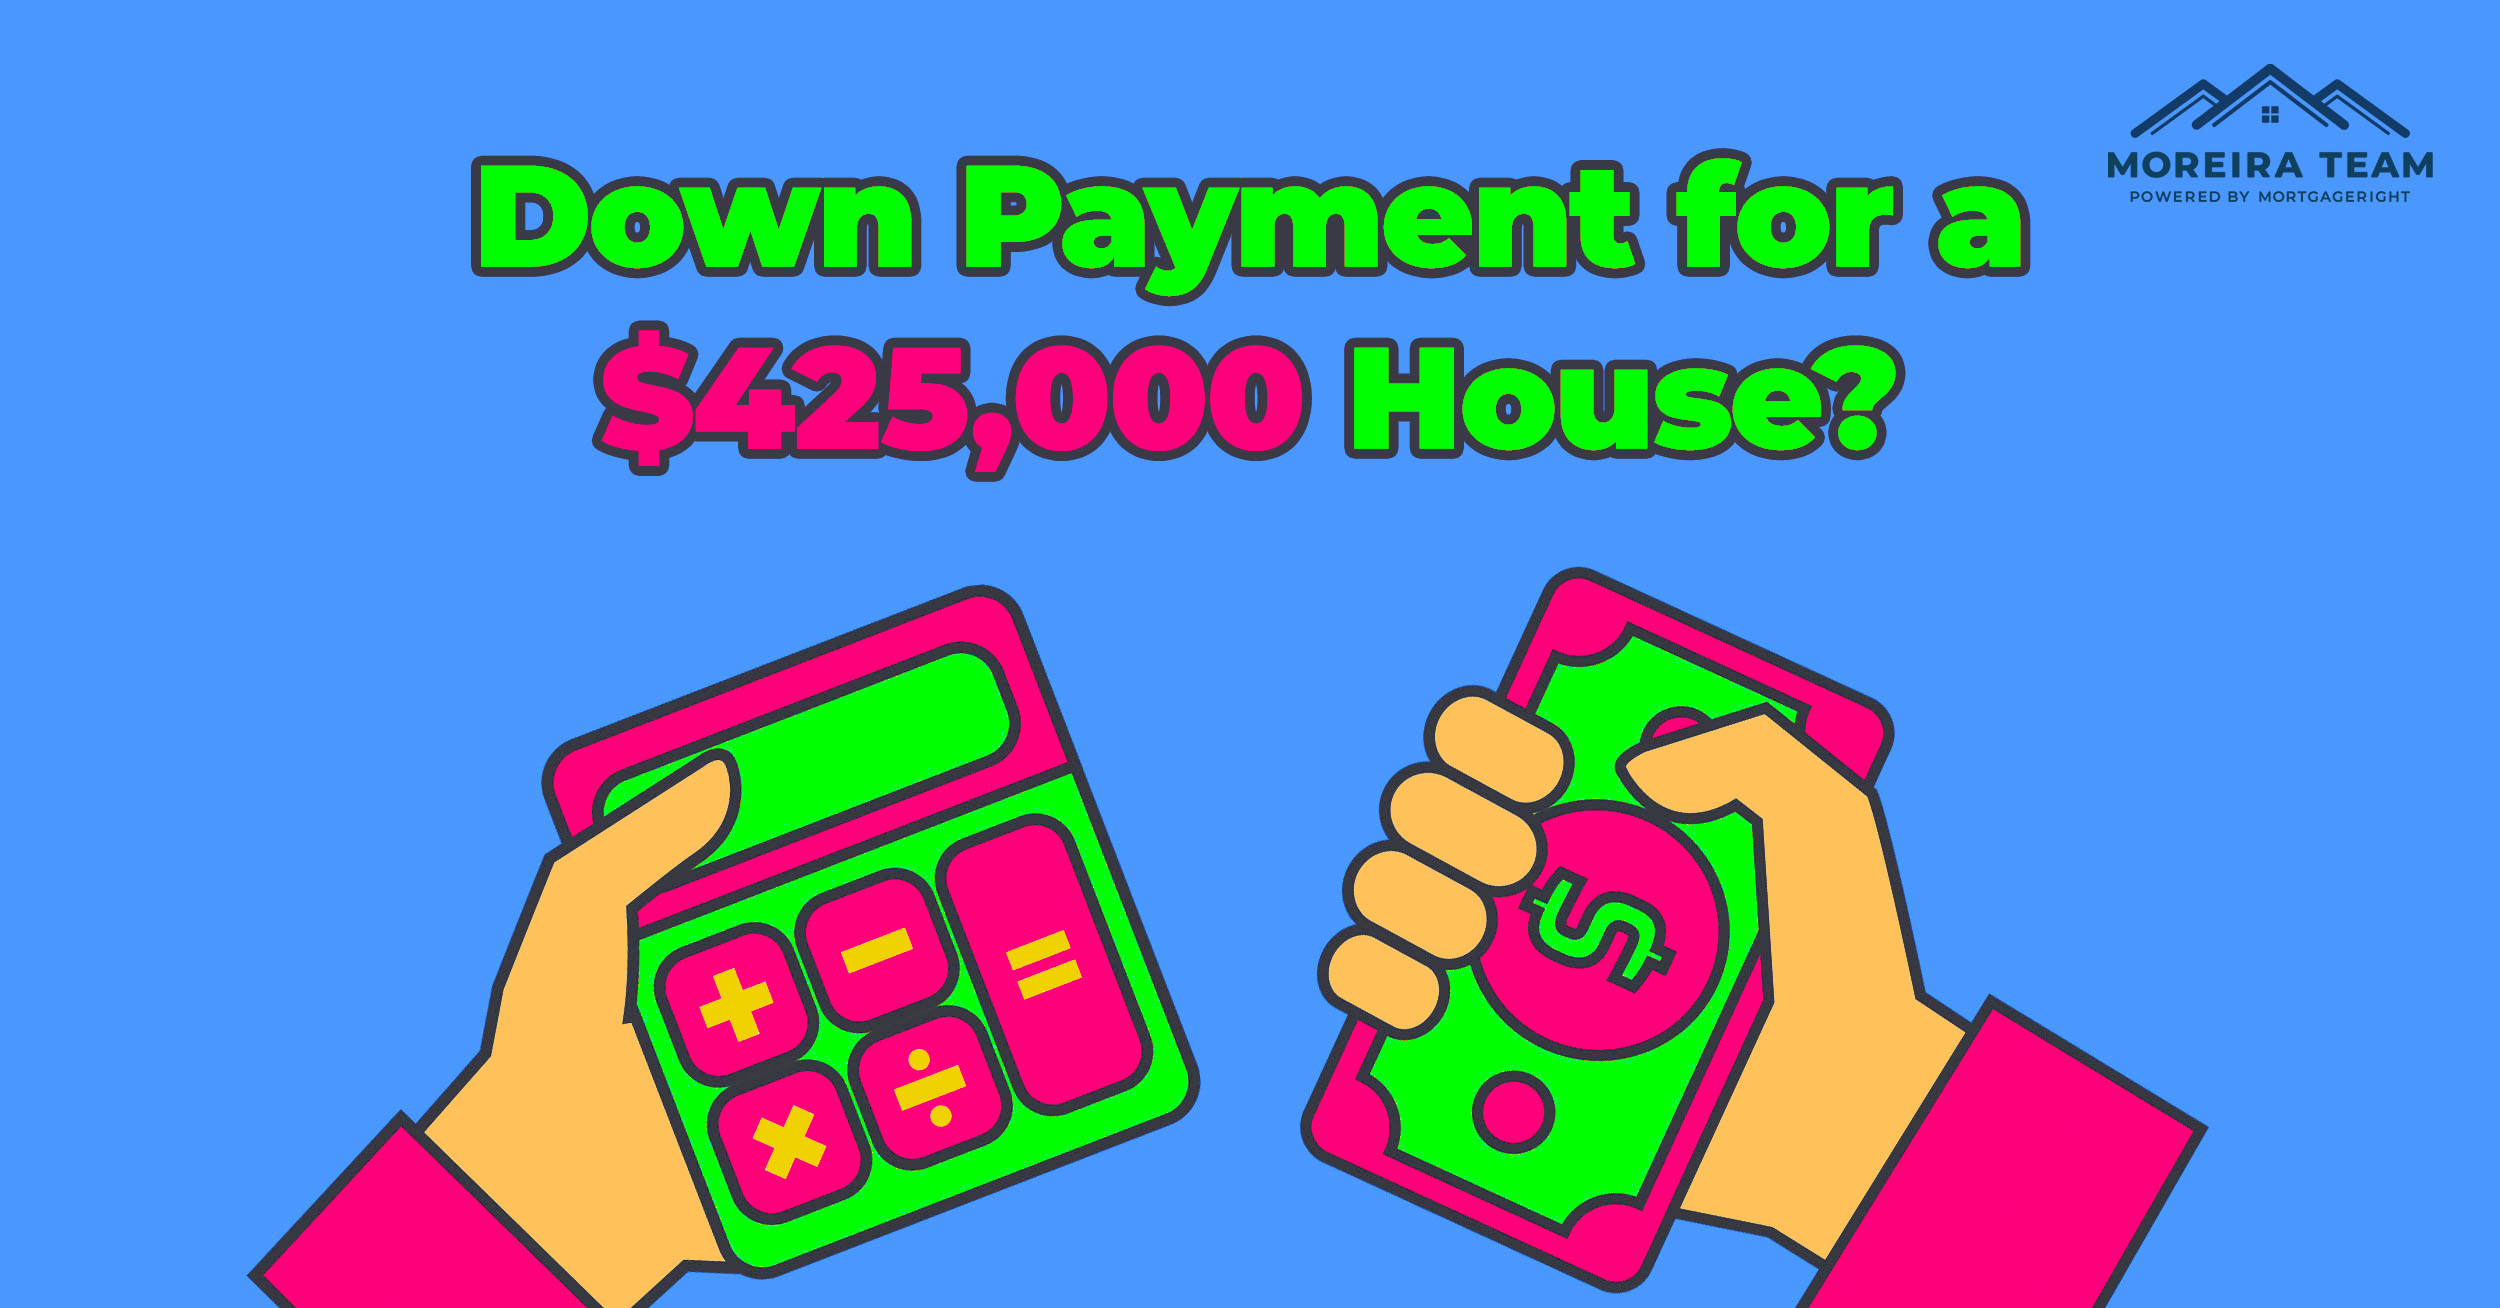 How Much is a Down Payment for a $425,000 Home?